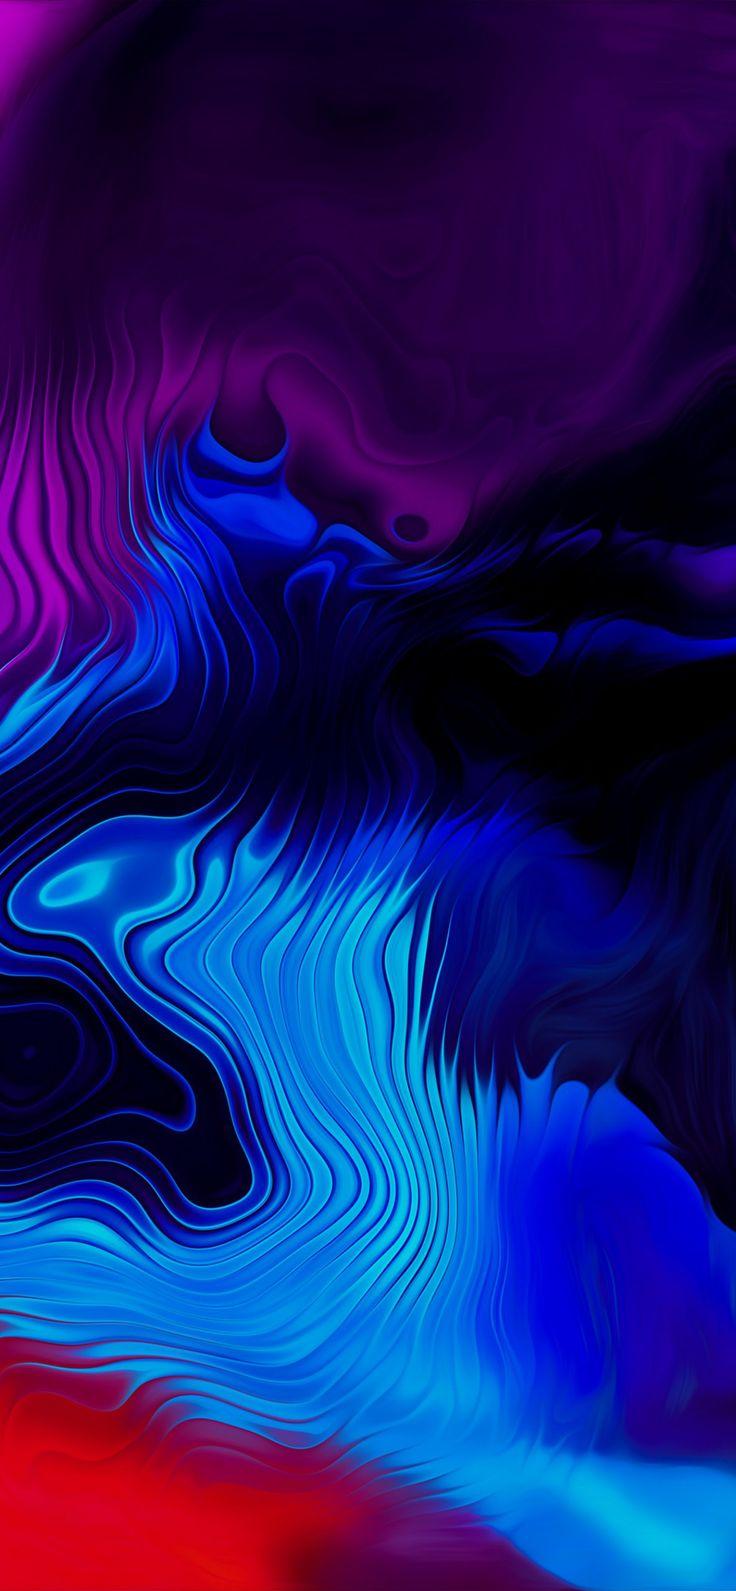 Squiggly Lines Gradient Of Blue And Purple For iPhone By Hk3ton